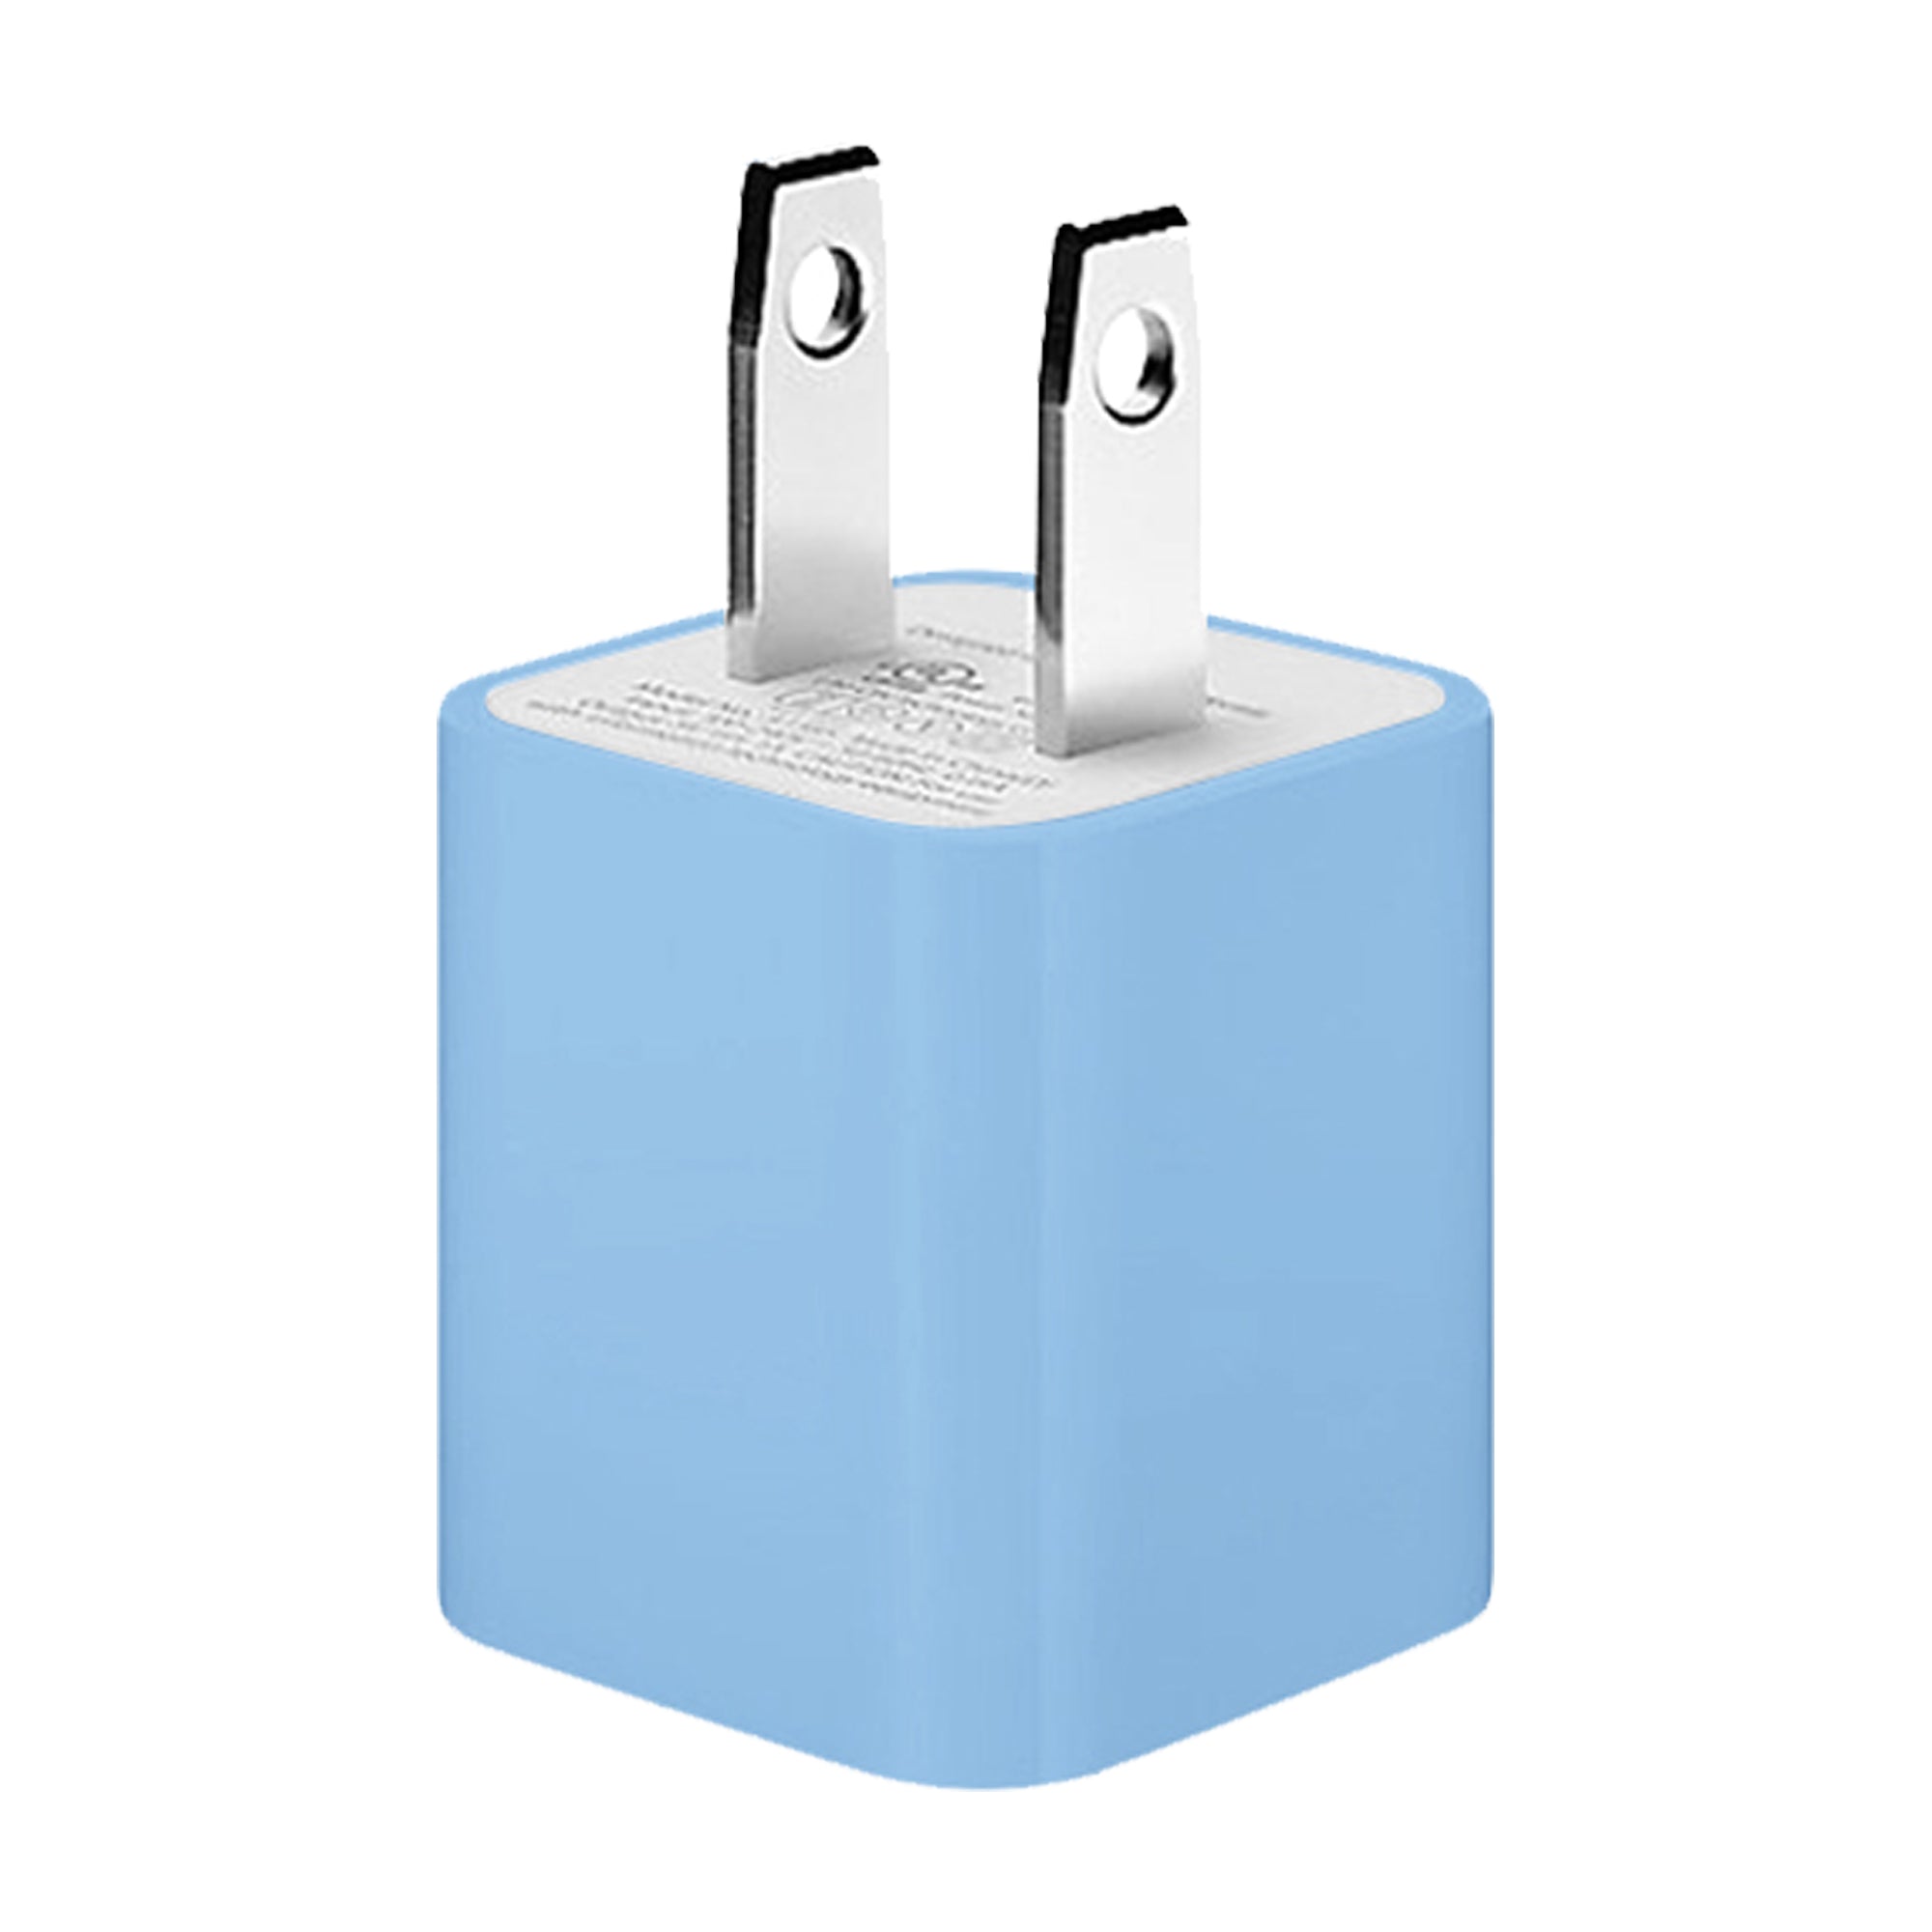 iTouch Charging Cube: Blue affordable charger